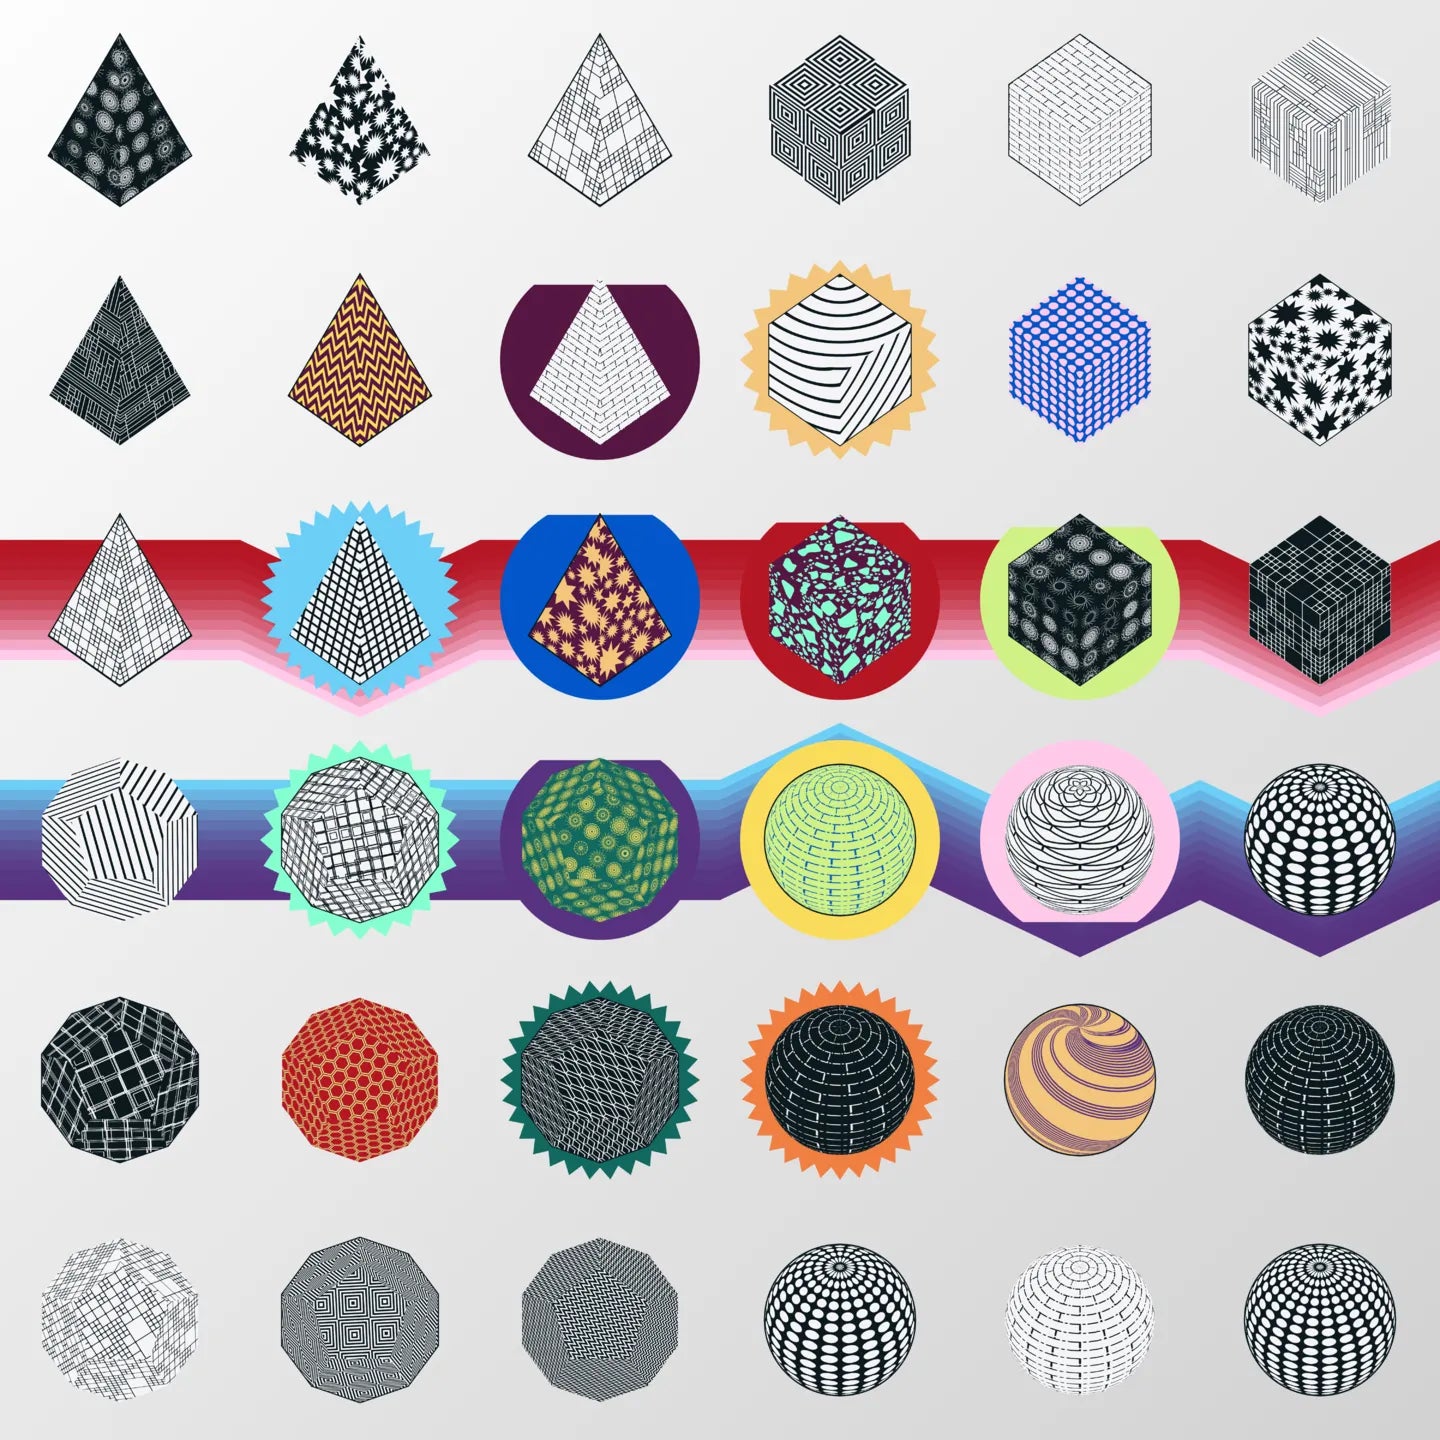 From Reservation to Coalition: The Stories that Generative Art Can Tell